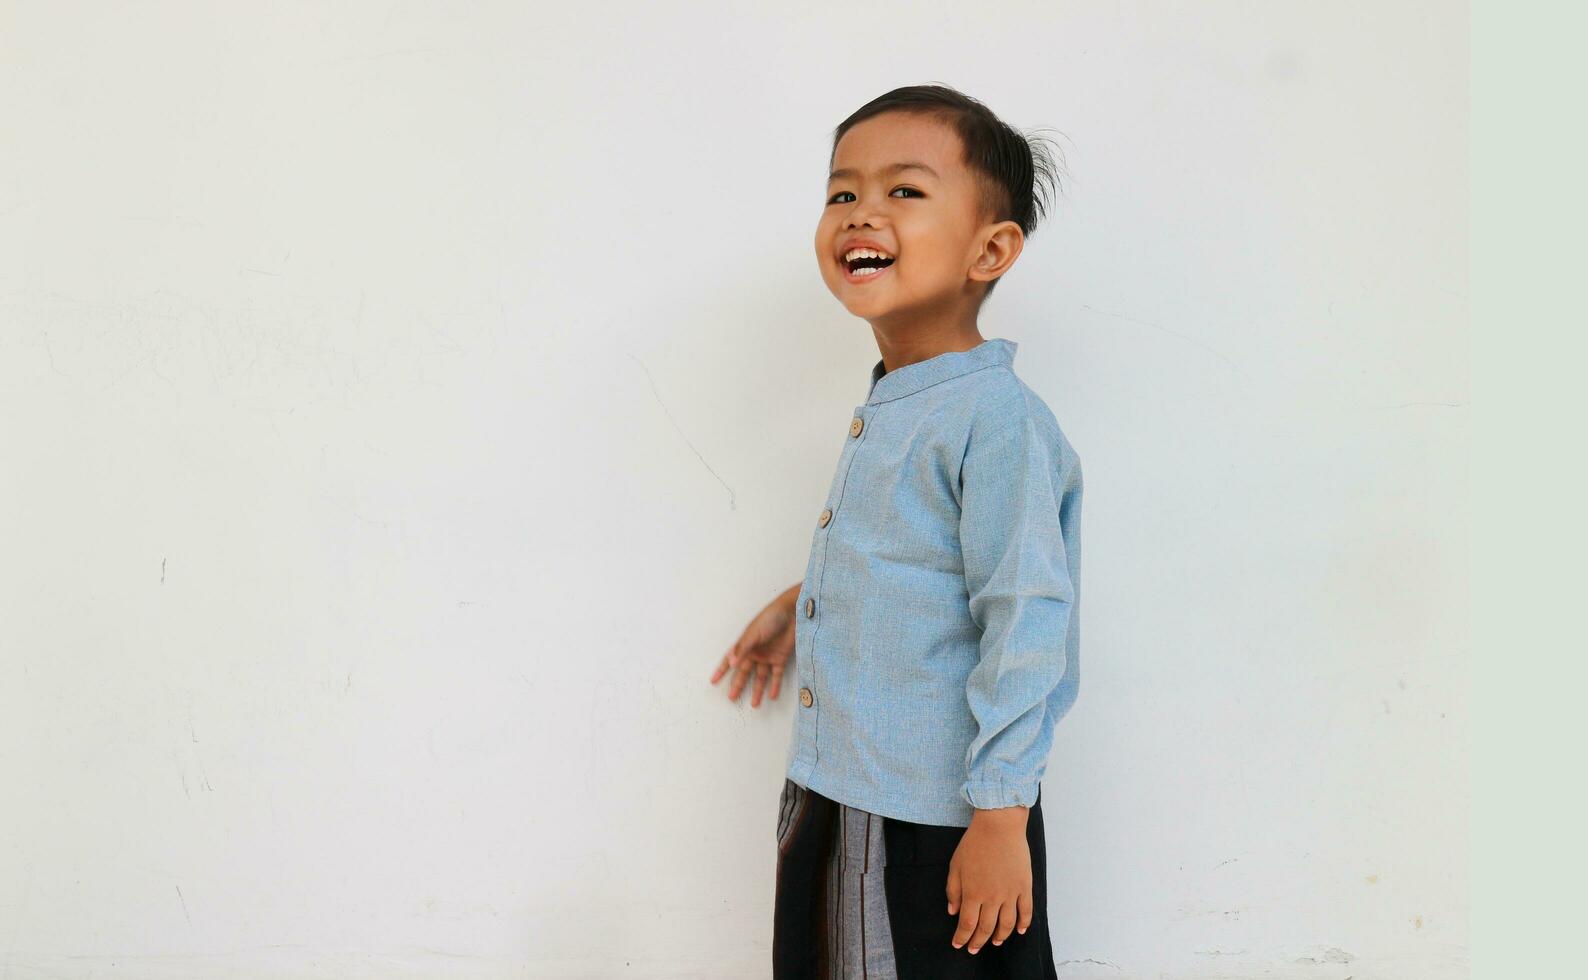 Excited little boy with blue shirt and sarong laughing photo